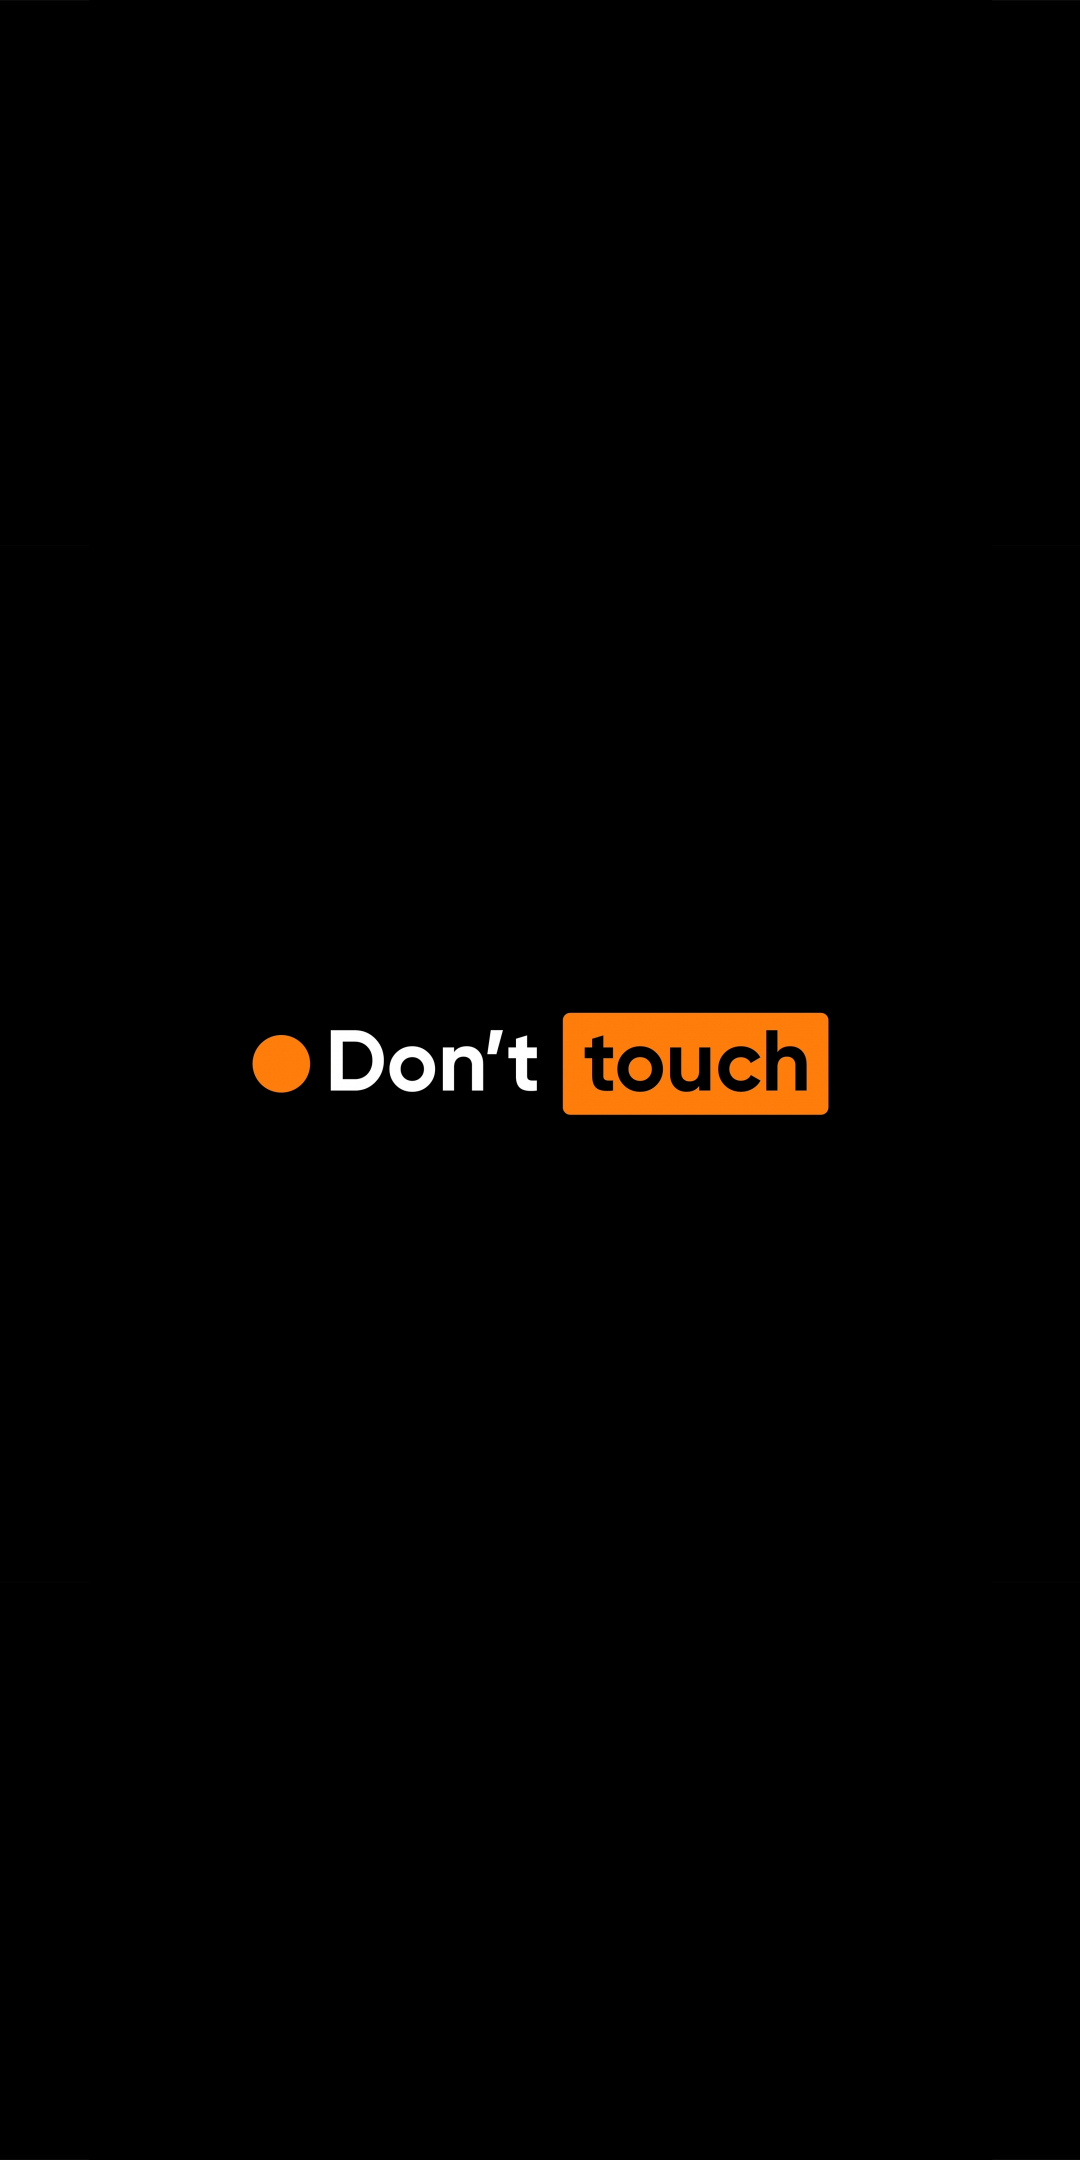 Don't touch, typography, minimal, 1080x2160 wallpaper